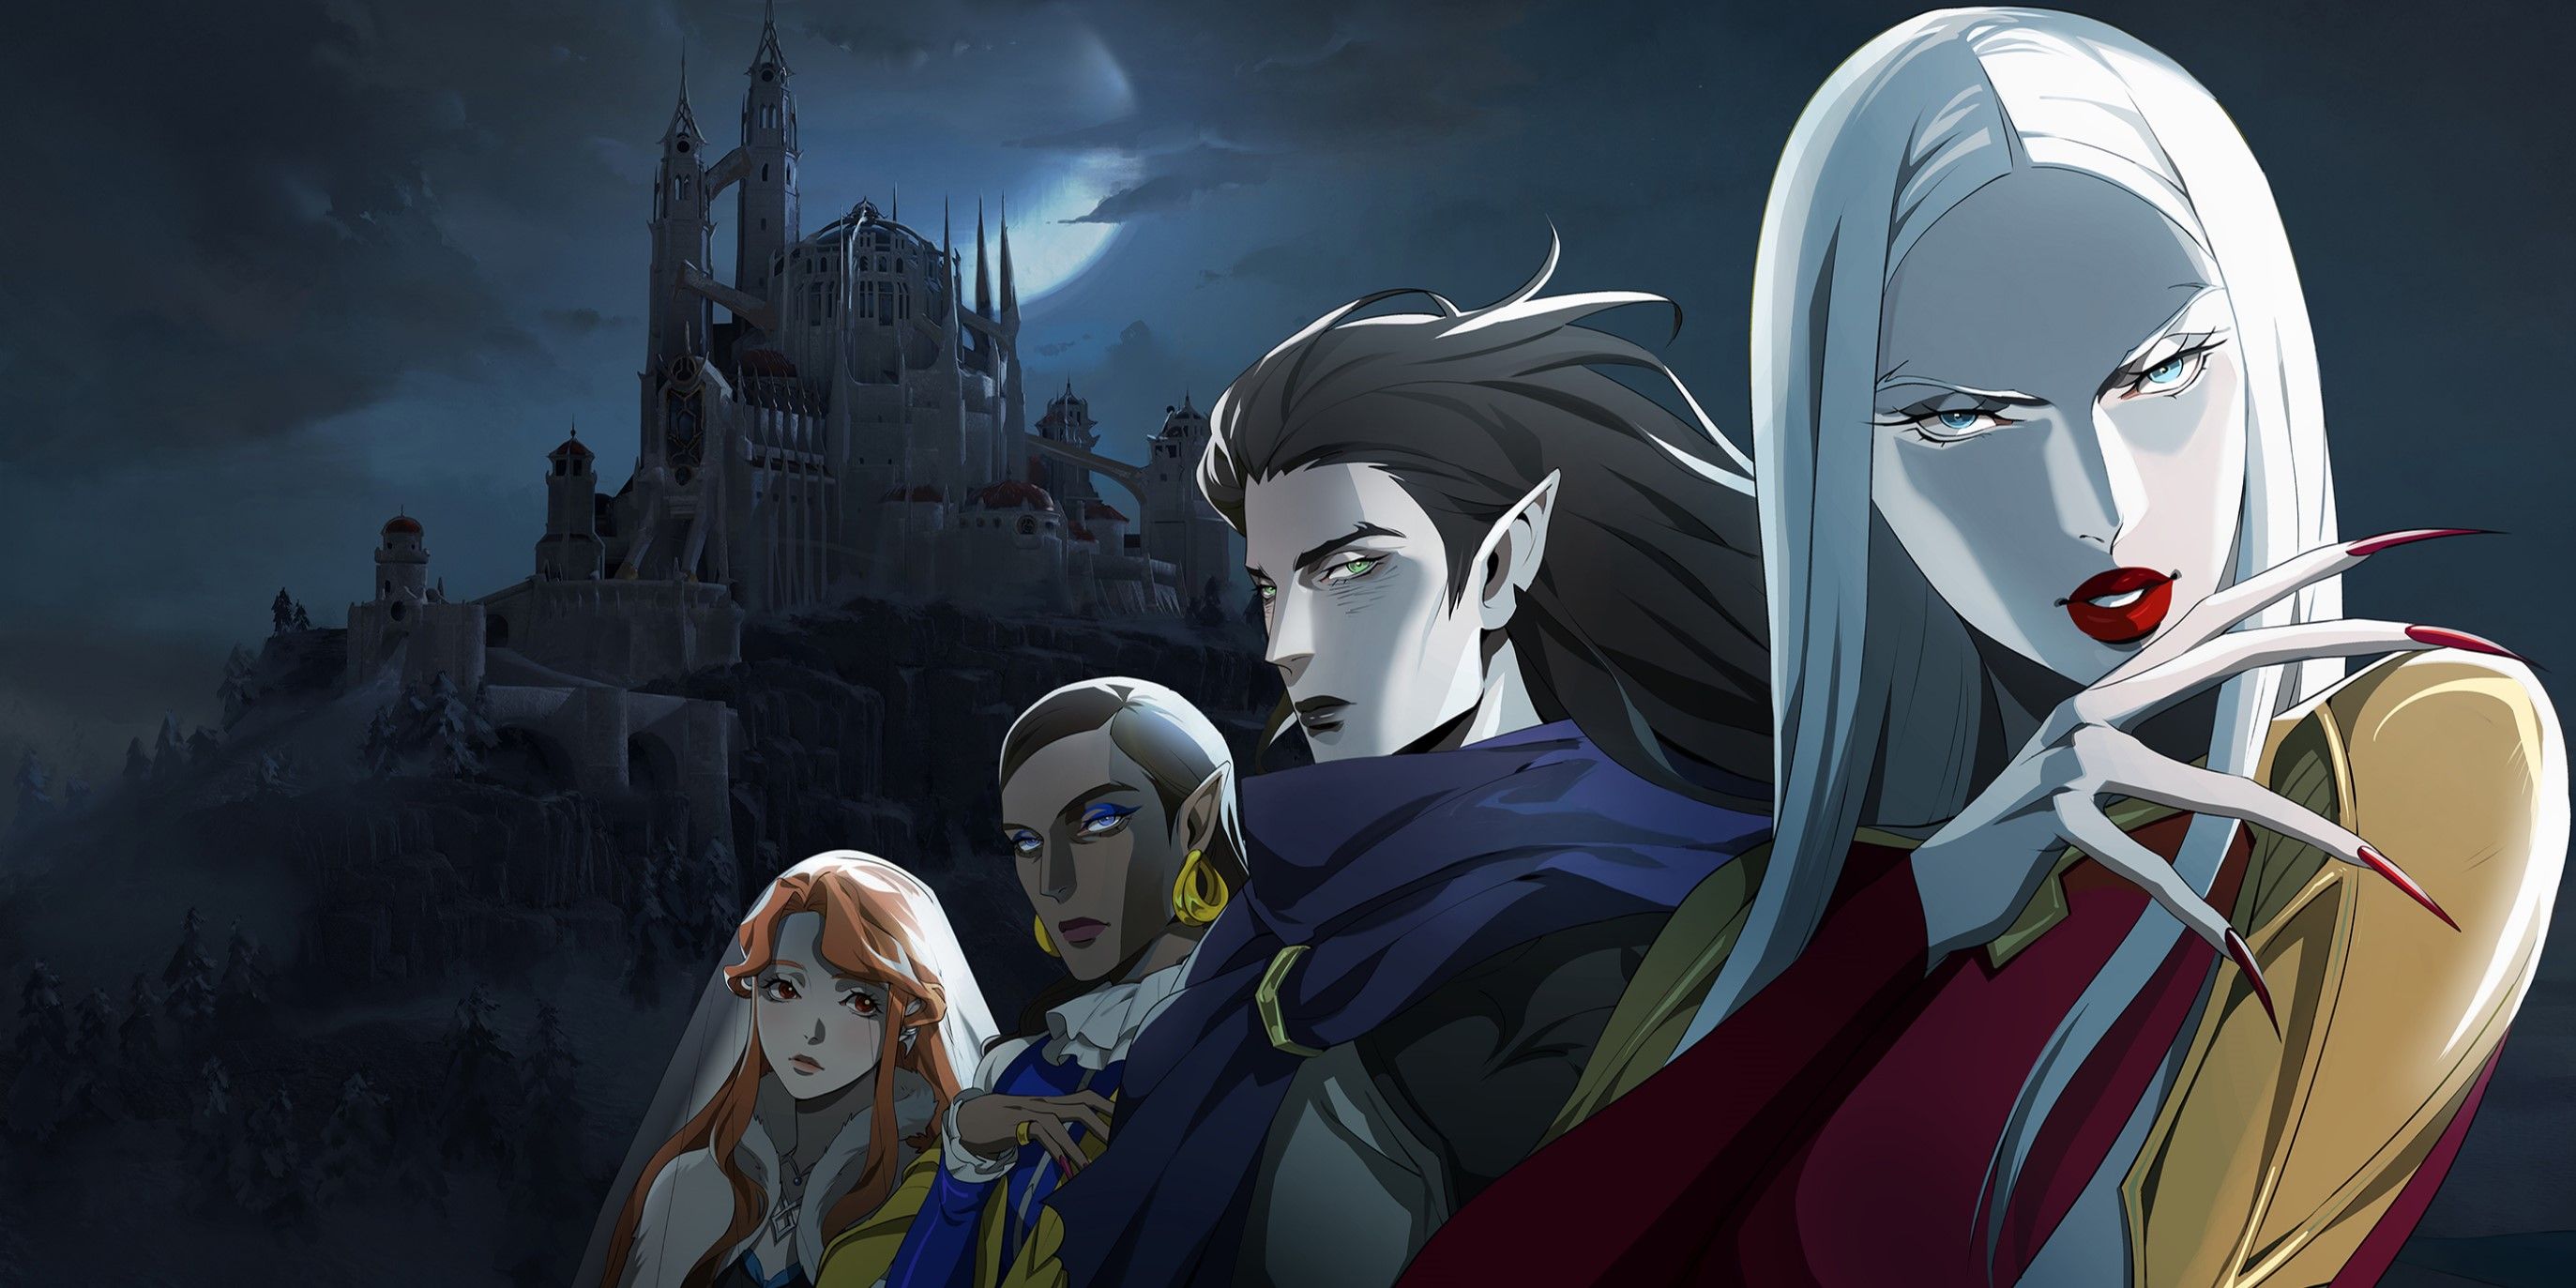 Council of sisters Castlevania